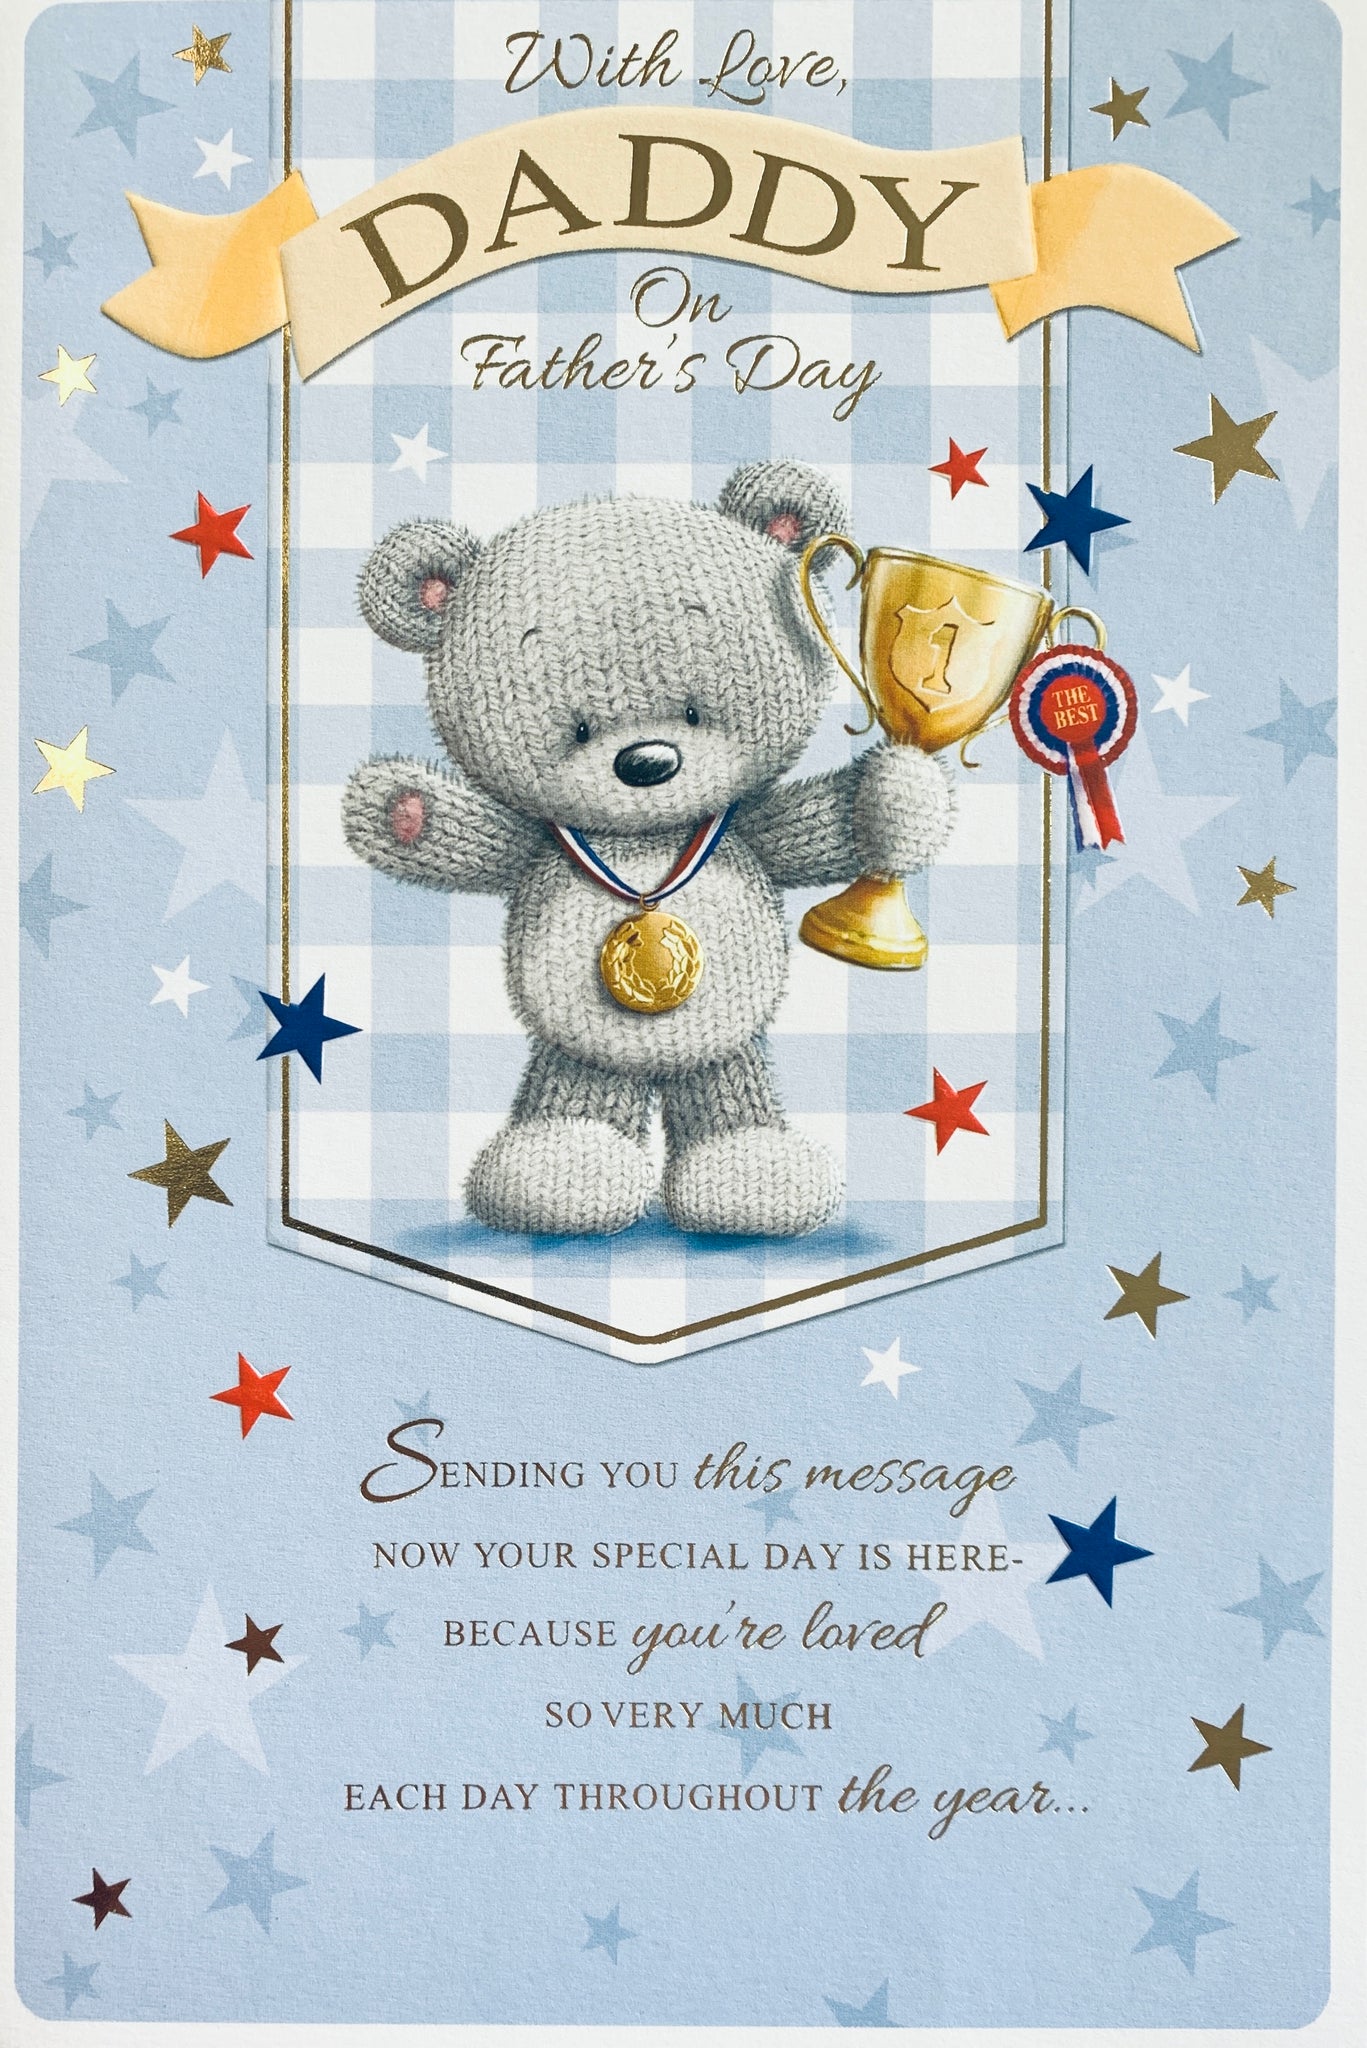 Daddy Father’s Day card cute bear holding trophy